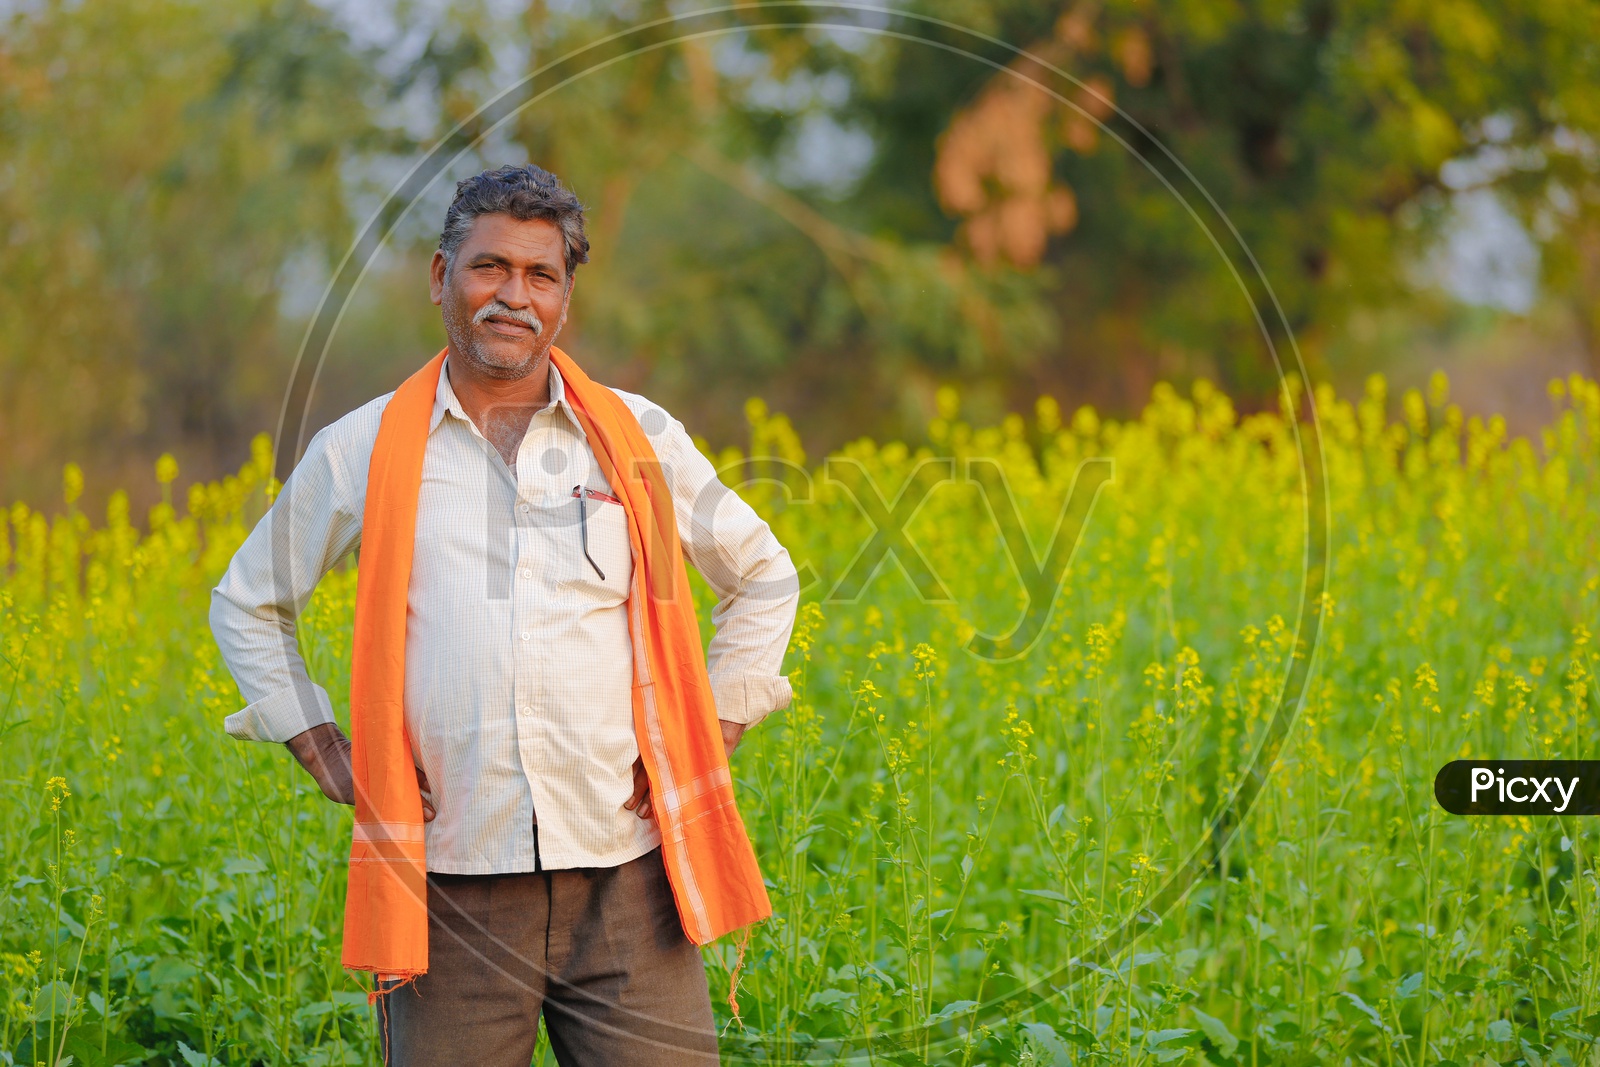 Indian Farmer In Agricultural Field With Happy Smile Face About His Corp